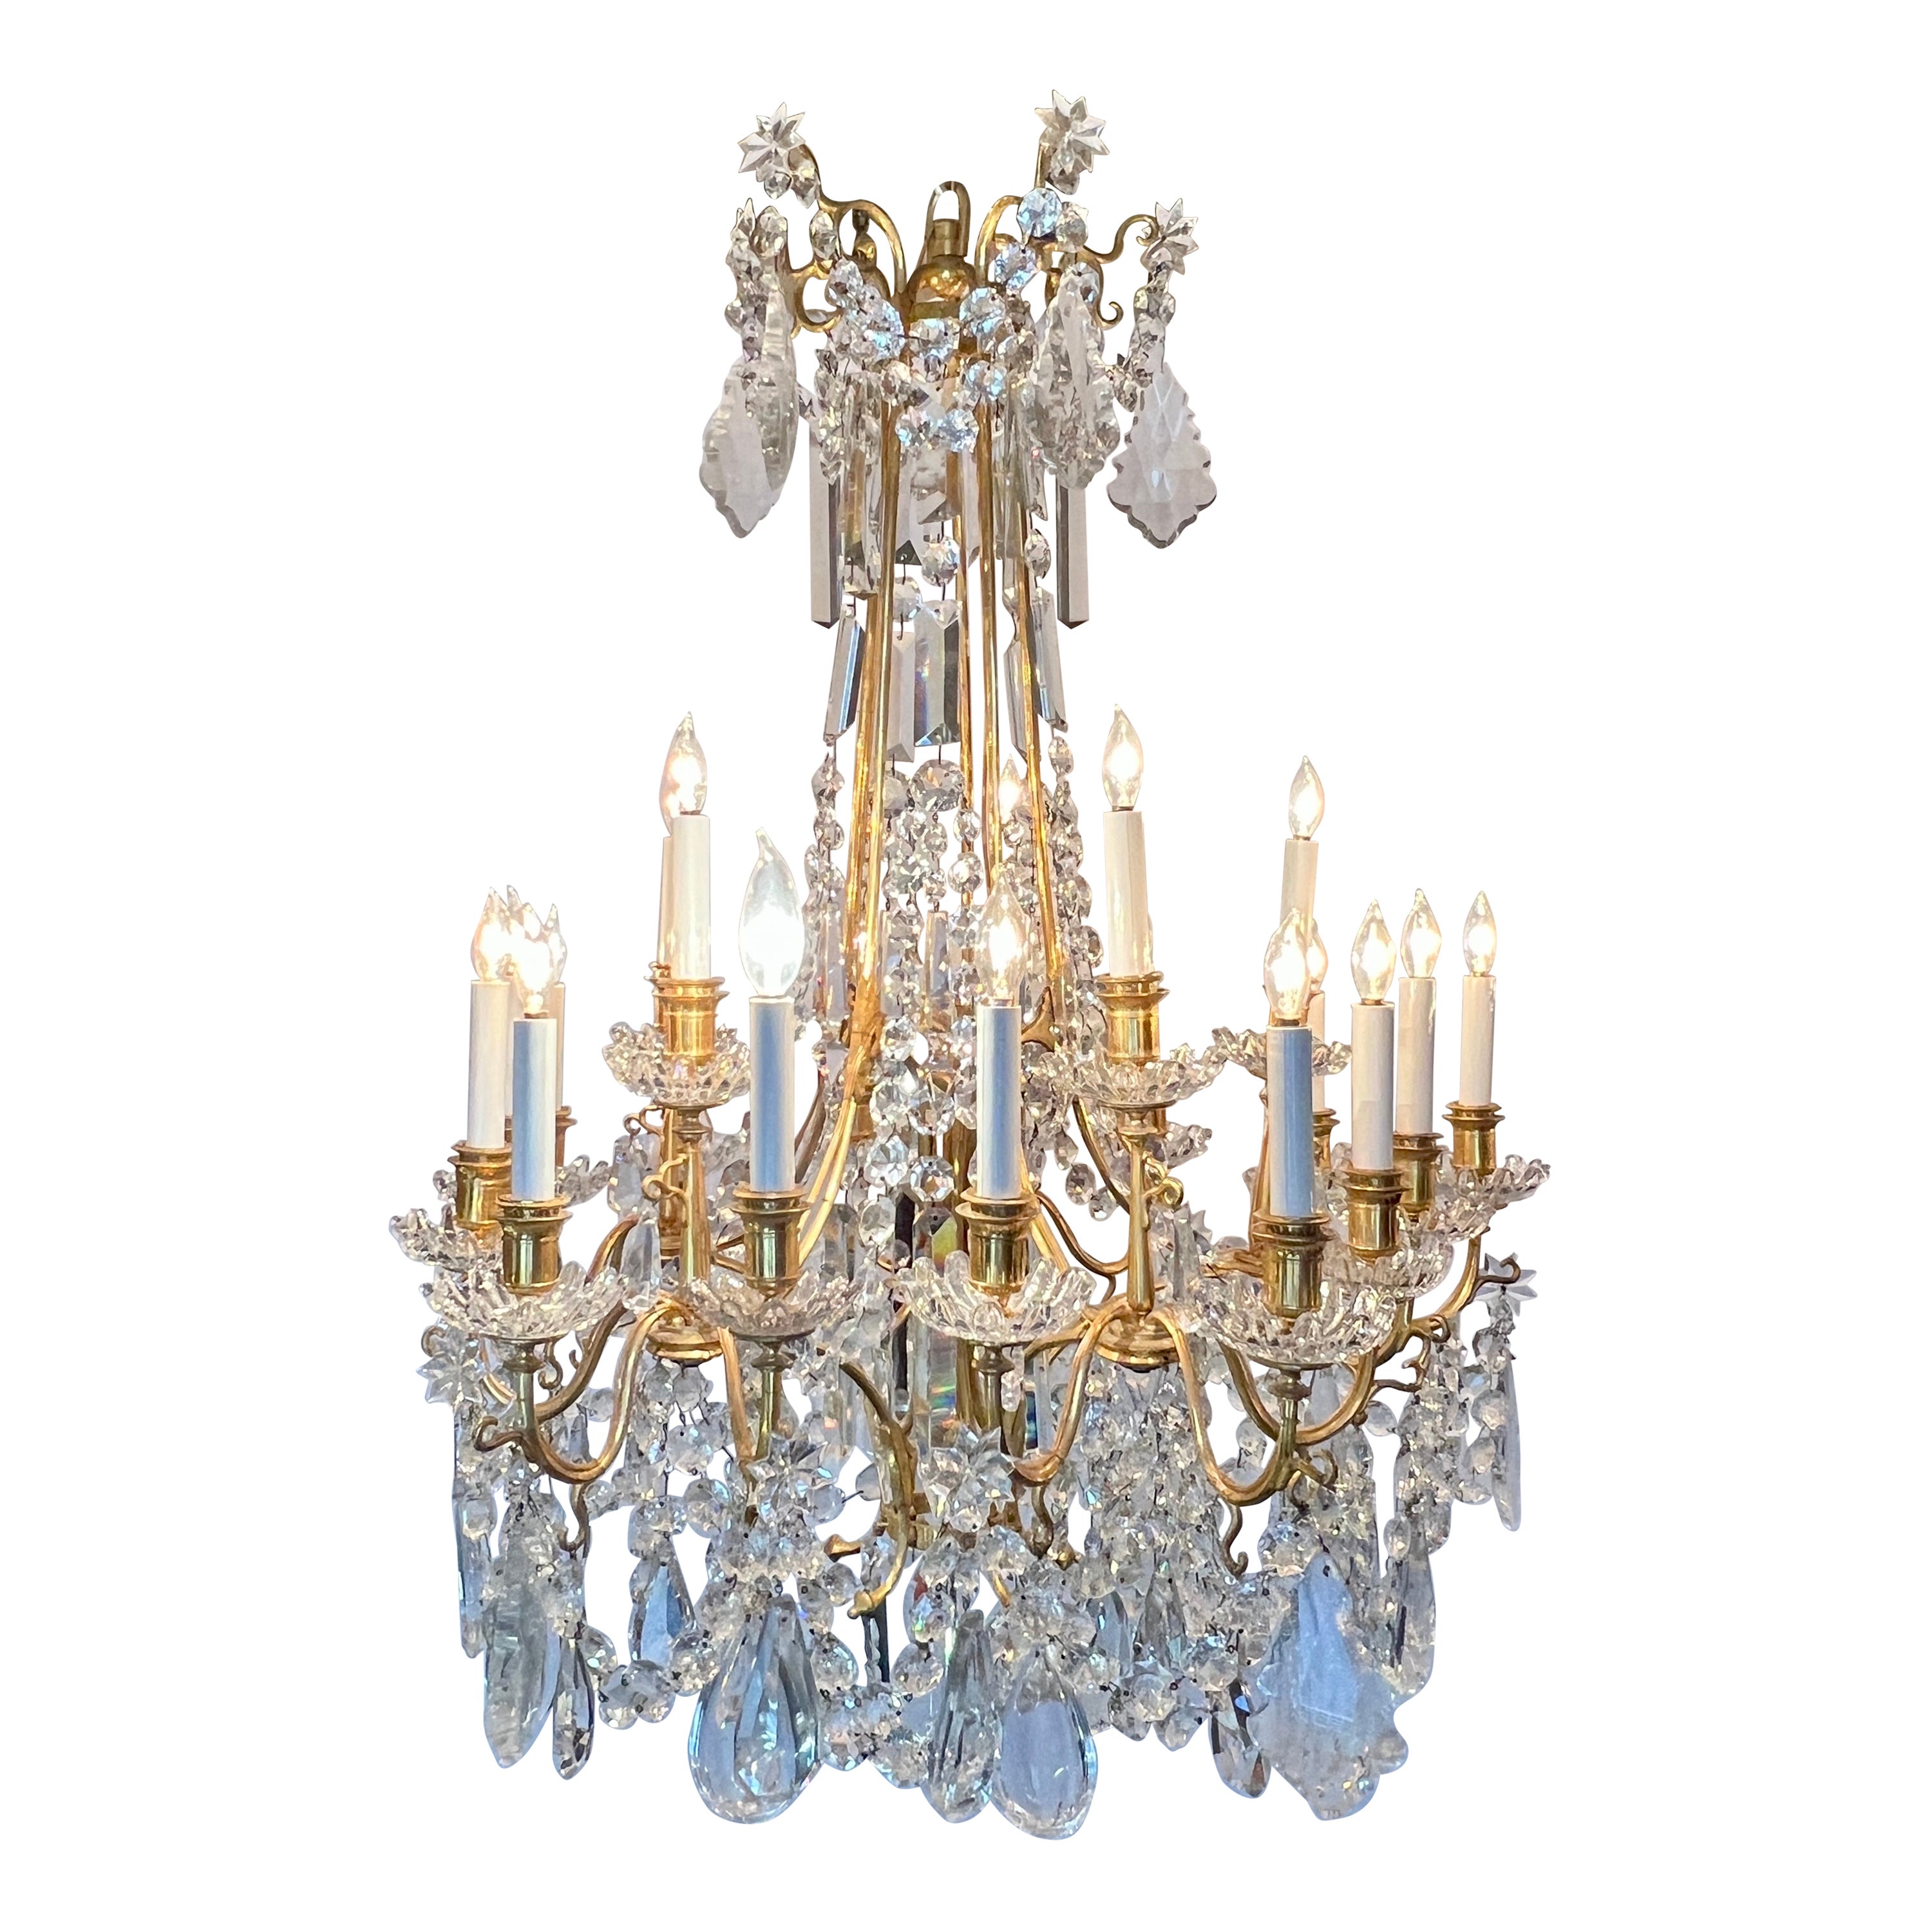 Antique French Gold Bronze & Baccarat Crystal Chandelier, Circa 1880-1890